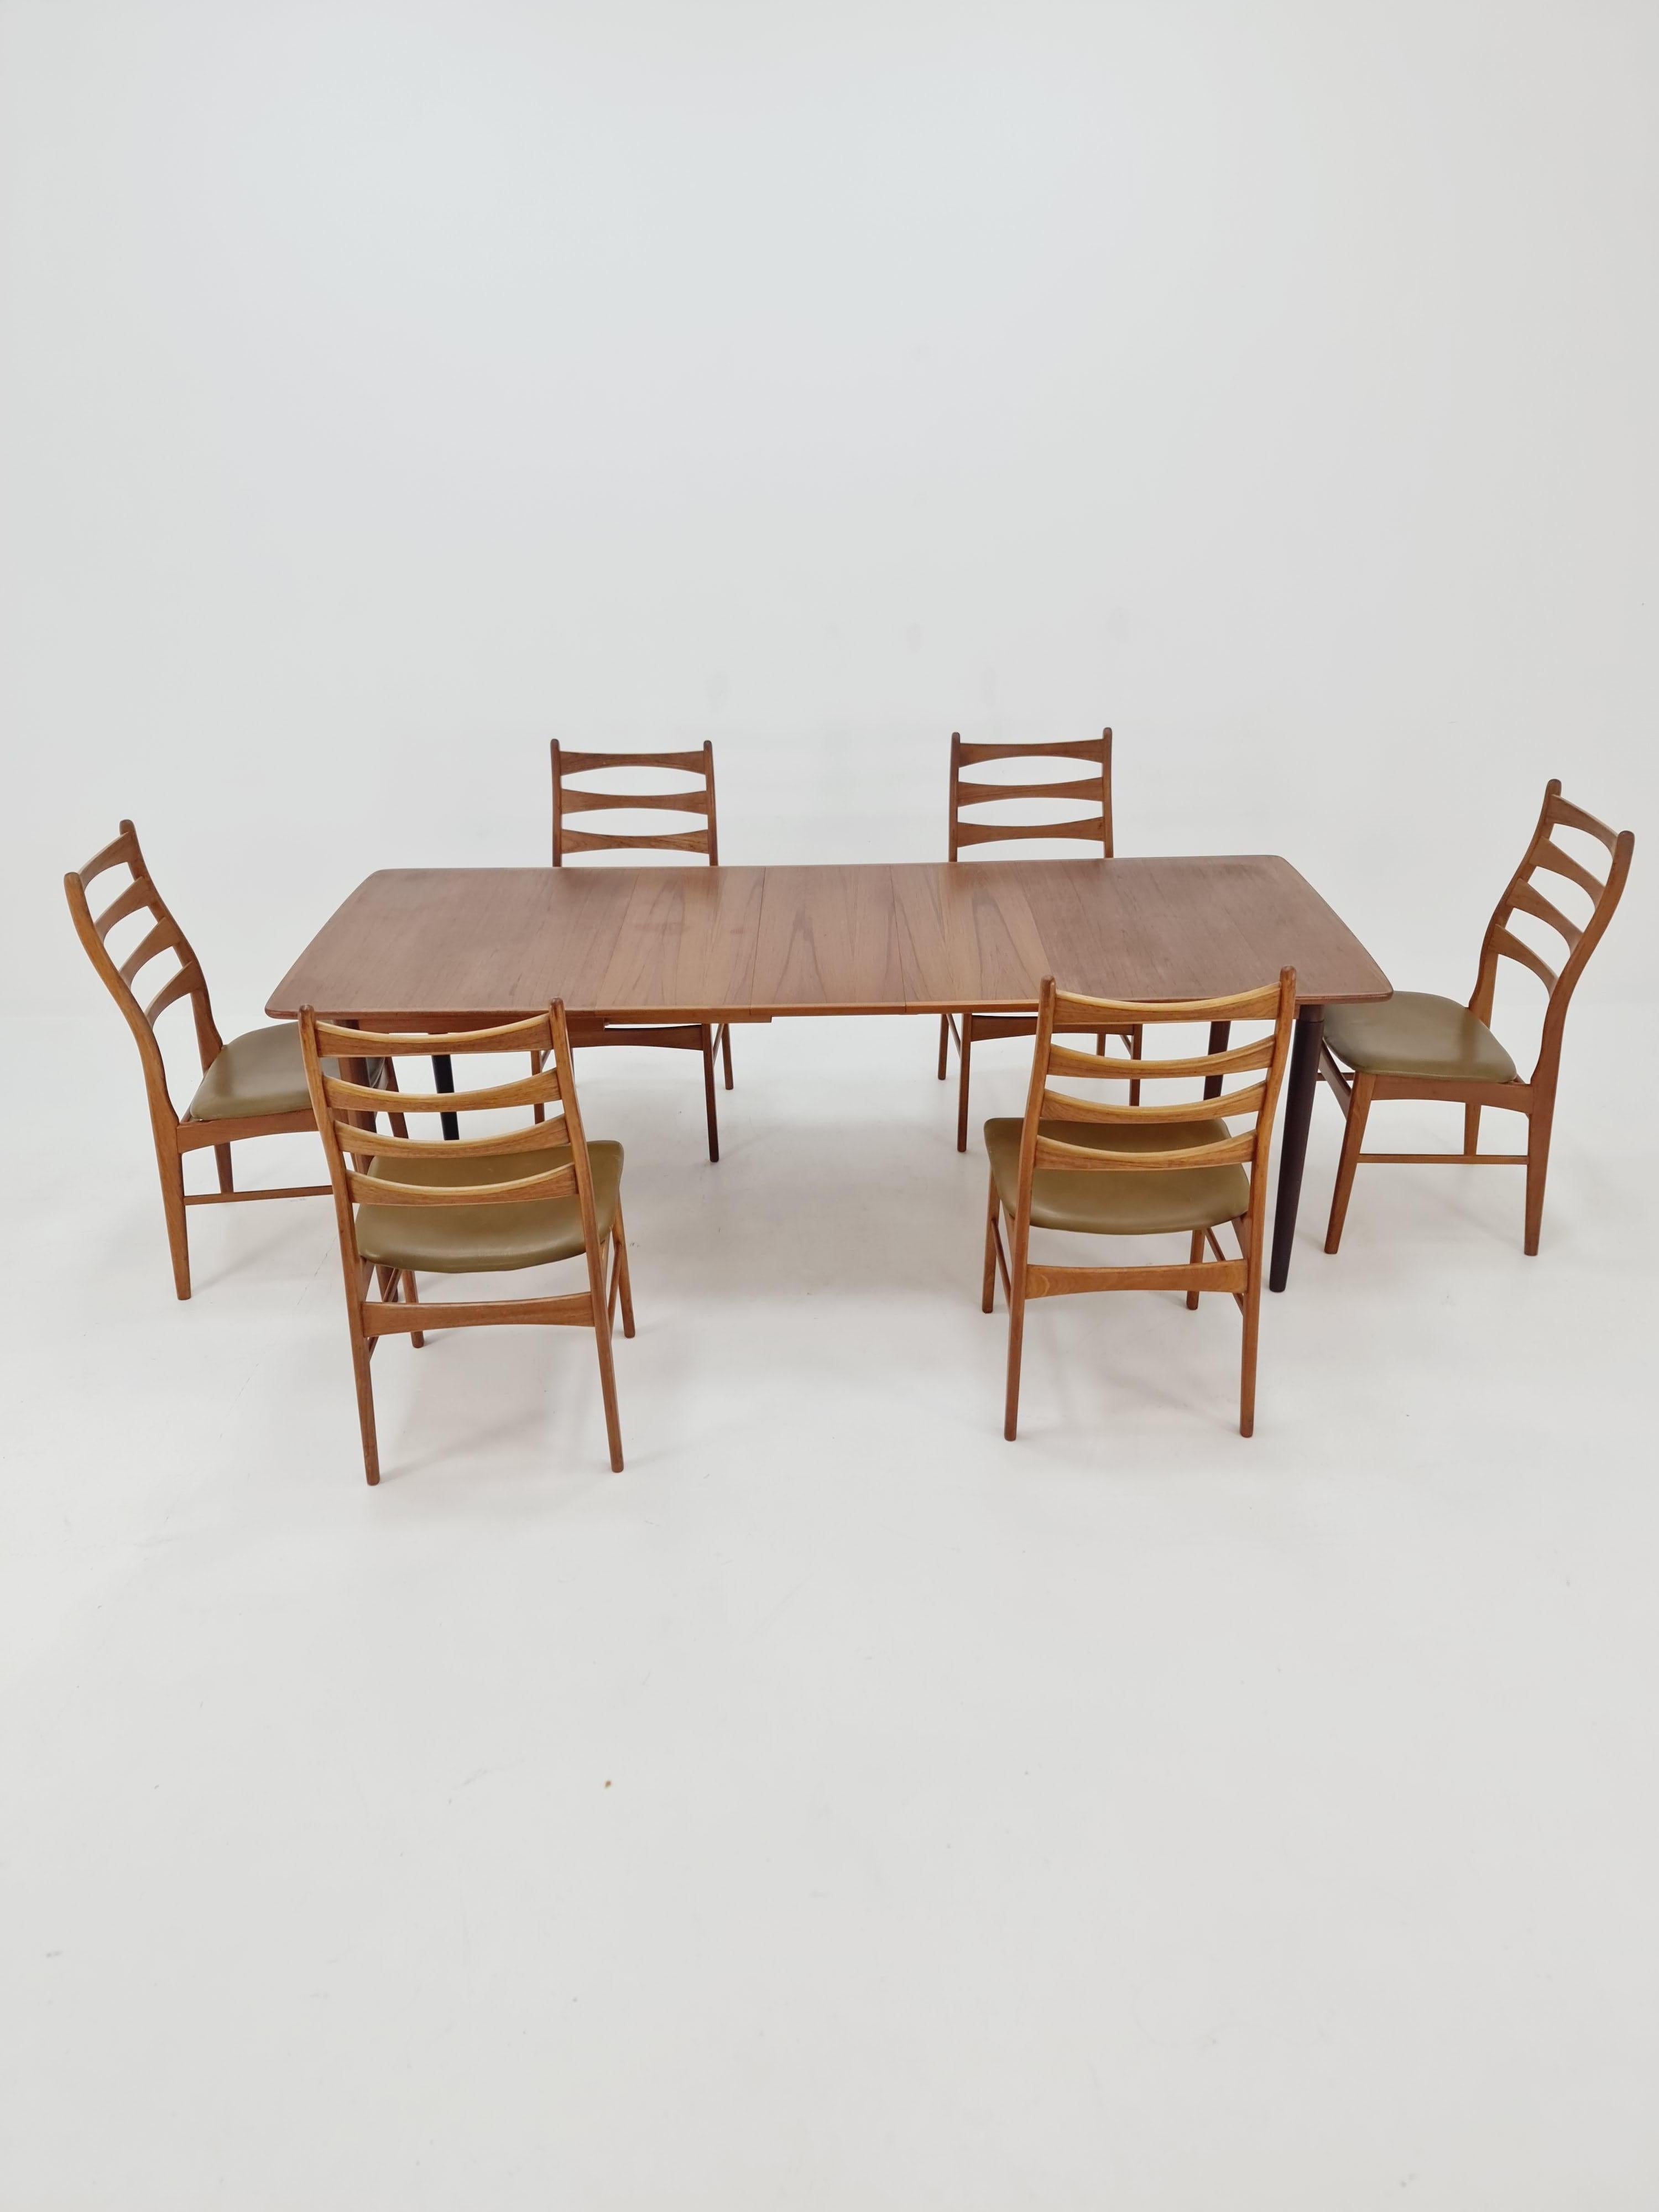 MId Century Large  teak Dining Table By Gustav Bahus , Norway , 1960s

The table is ingood condition. 

Made in Norway by Gustav Bahus 

The table can be enlarged very easily by means of the 3  plates and thus offers enough space for 10 people.